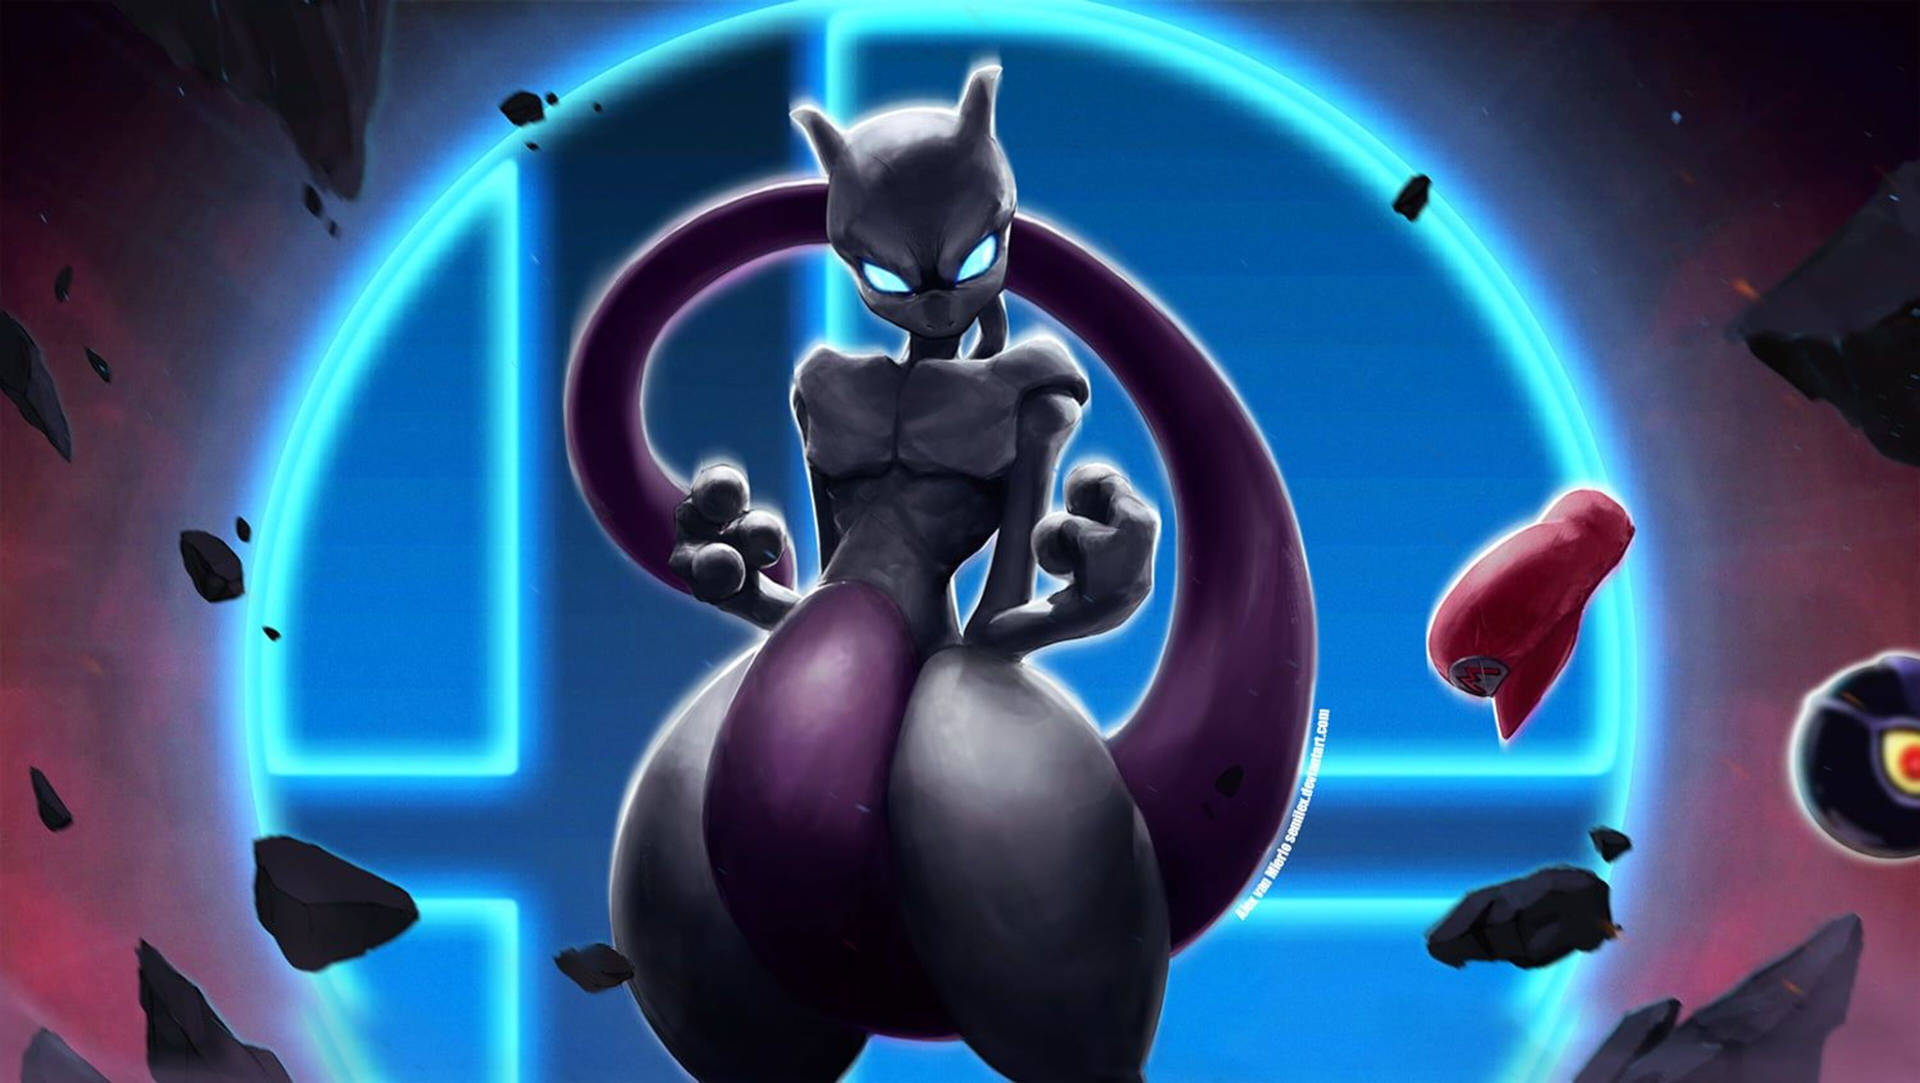 Cover Your Eyes, The Mighty Mewtwo Is Here! Background